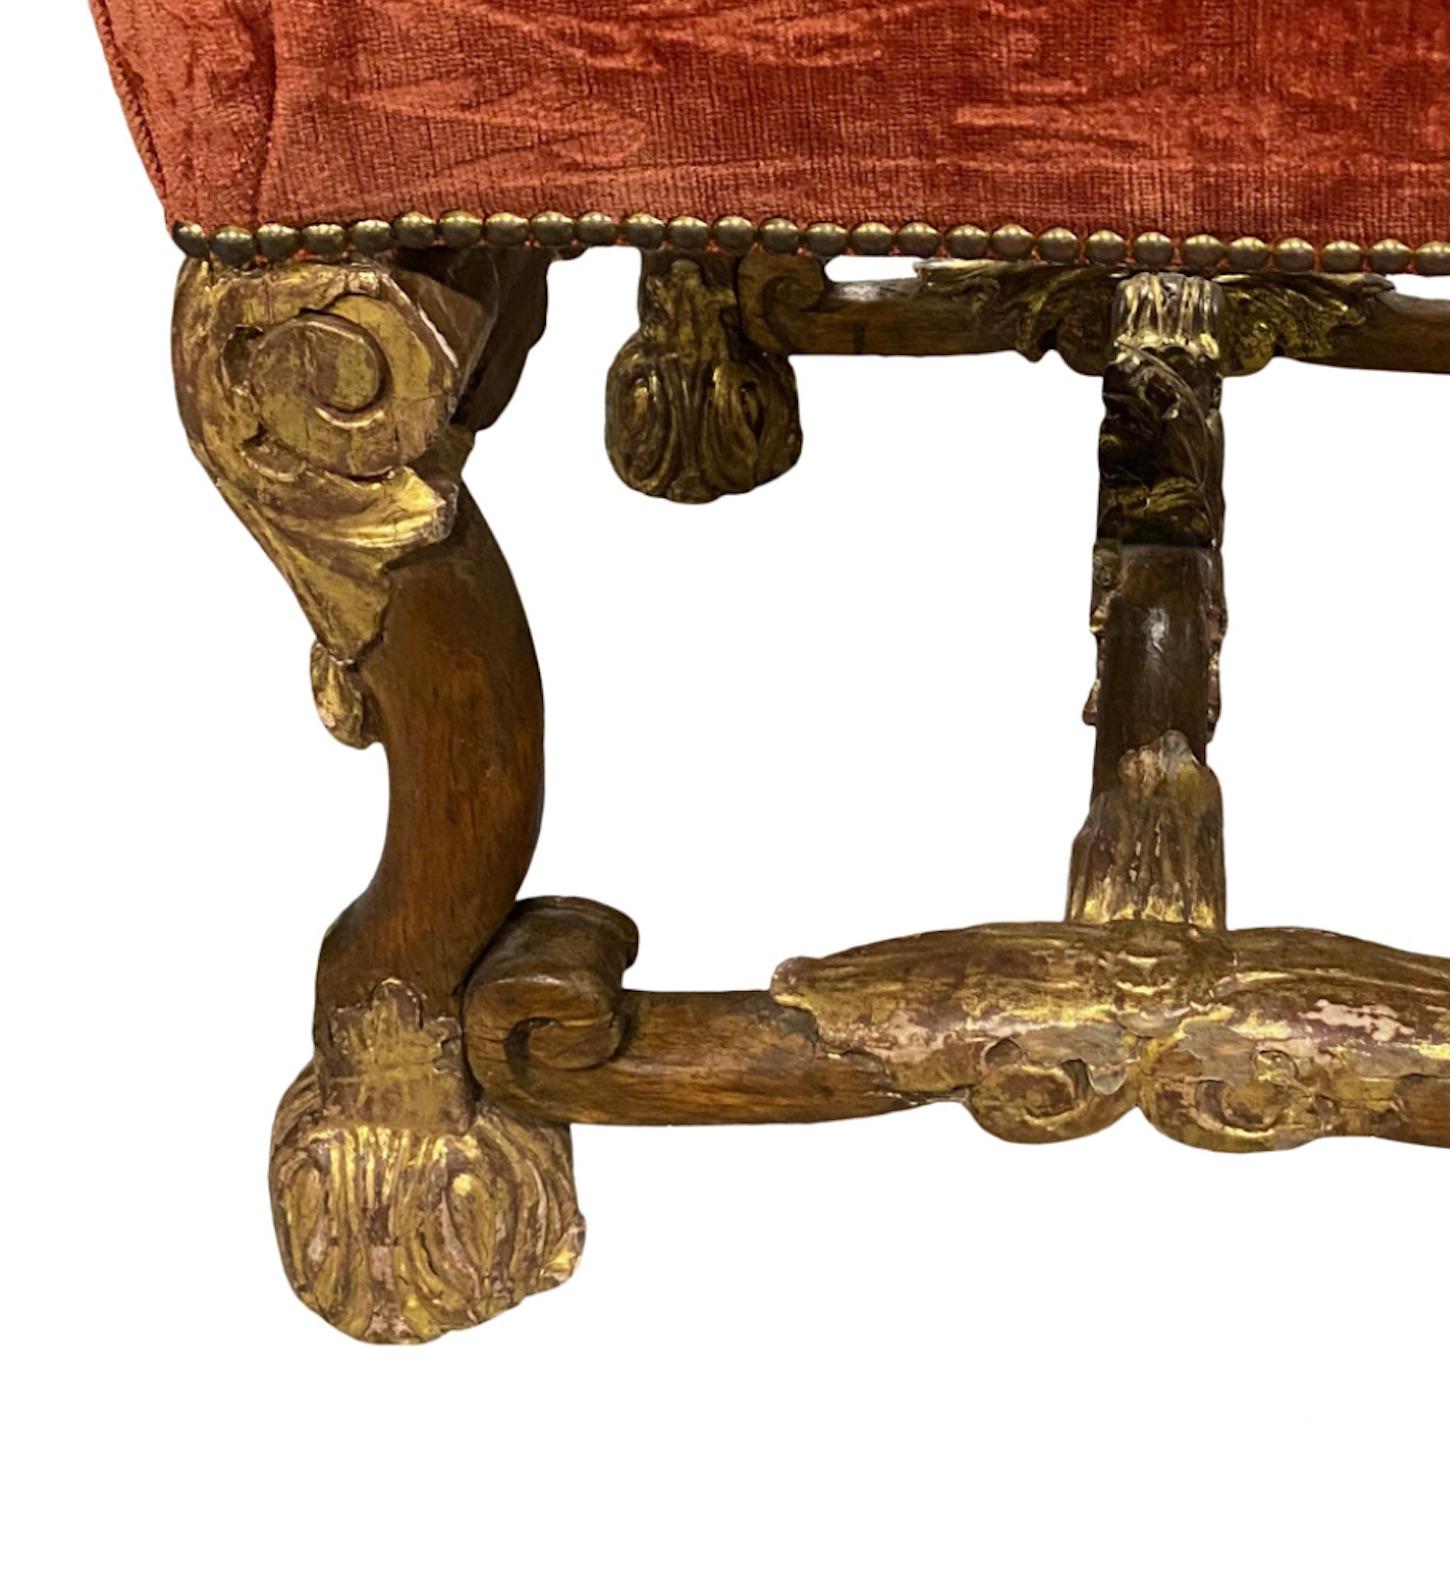 Italian Baroque Stool with Velvet Upholstery and Gilded Scrolled Legs and Paw Feet

18 1/2″H x 19″W x 18″D

19th Century, sturdy antique condition